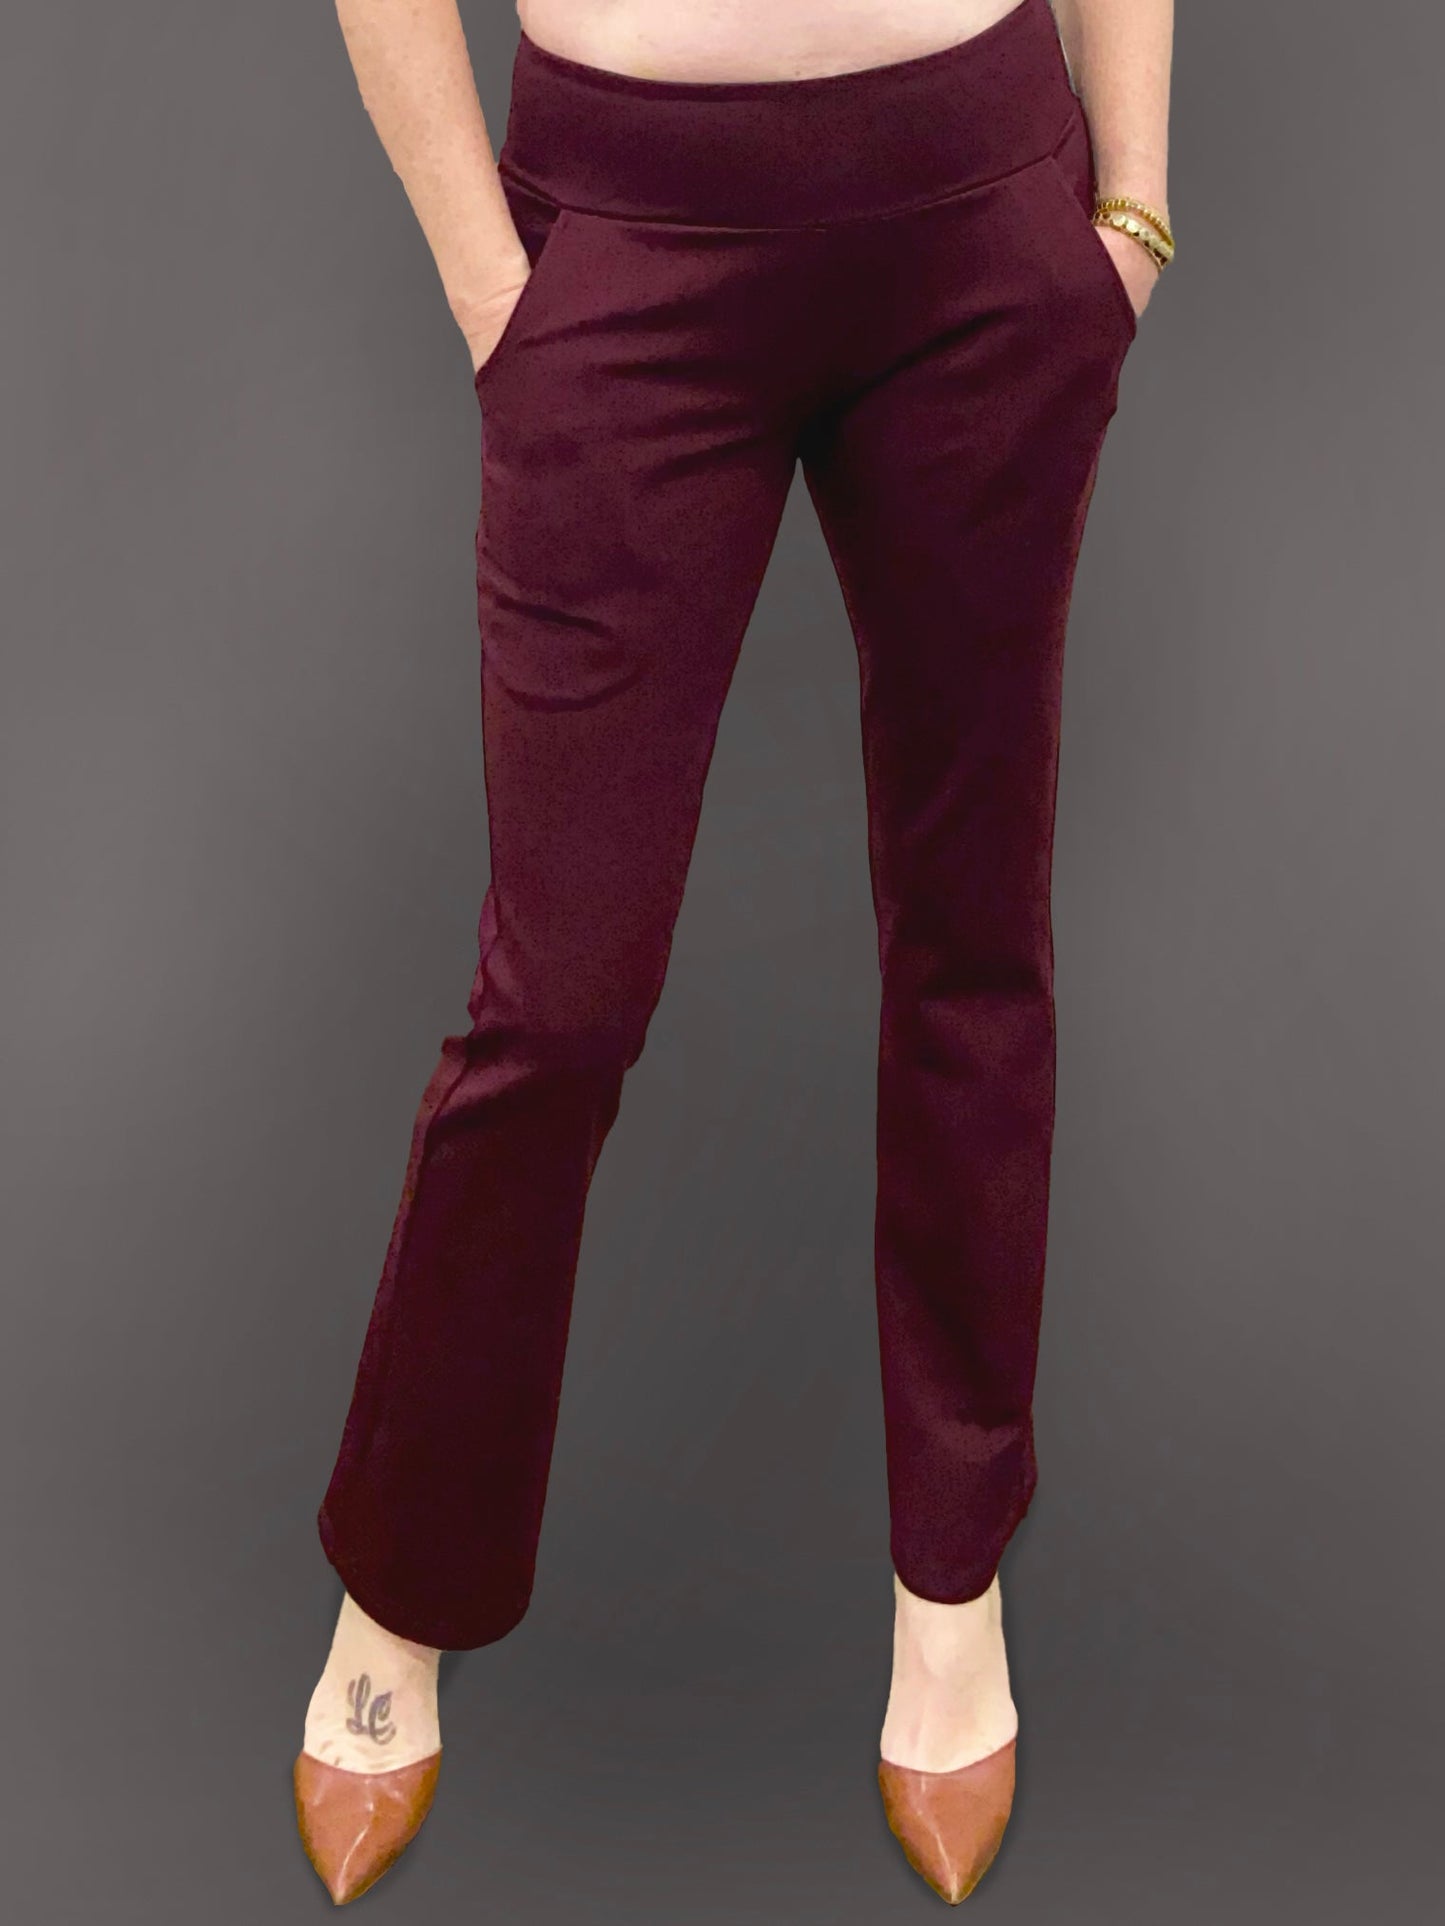 Load image into Gallery viewer, LIMITED EDITION Burgundy Kick Flares - Dotty
